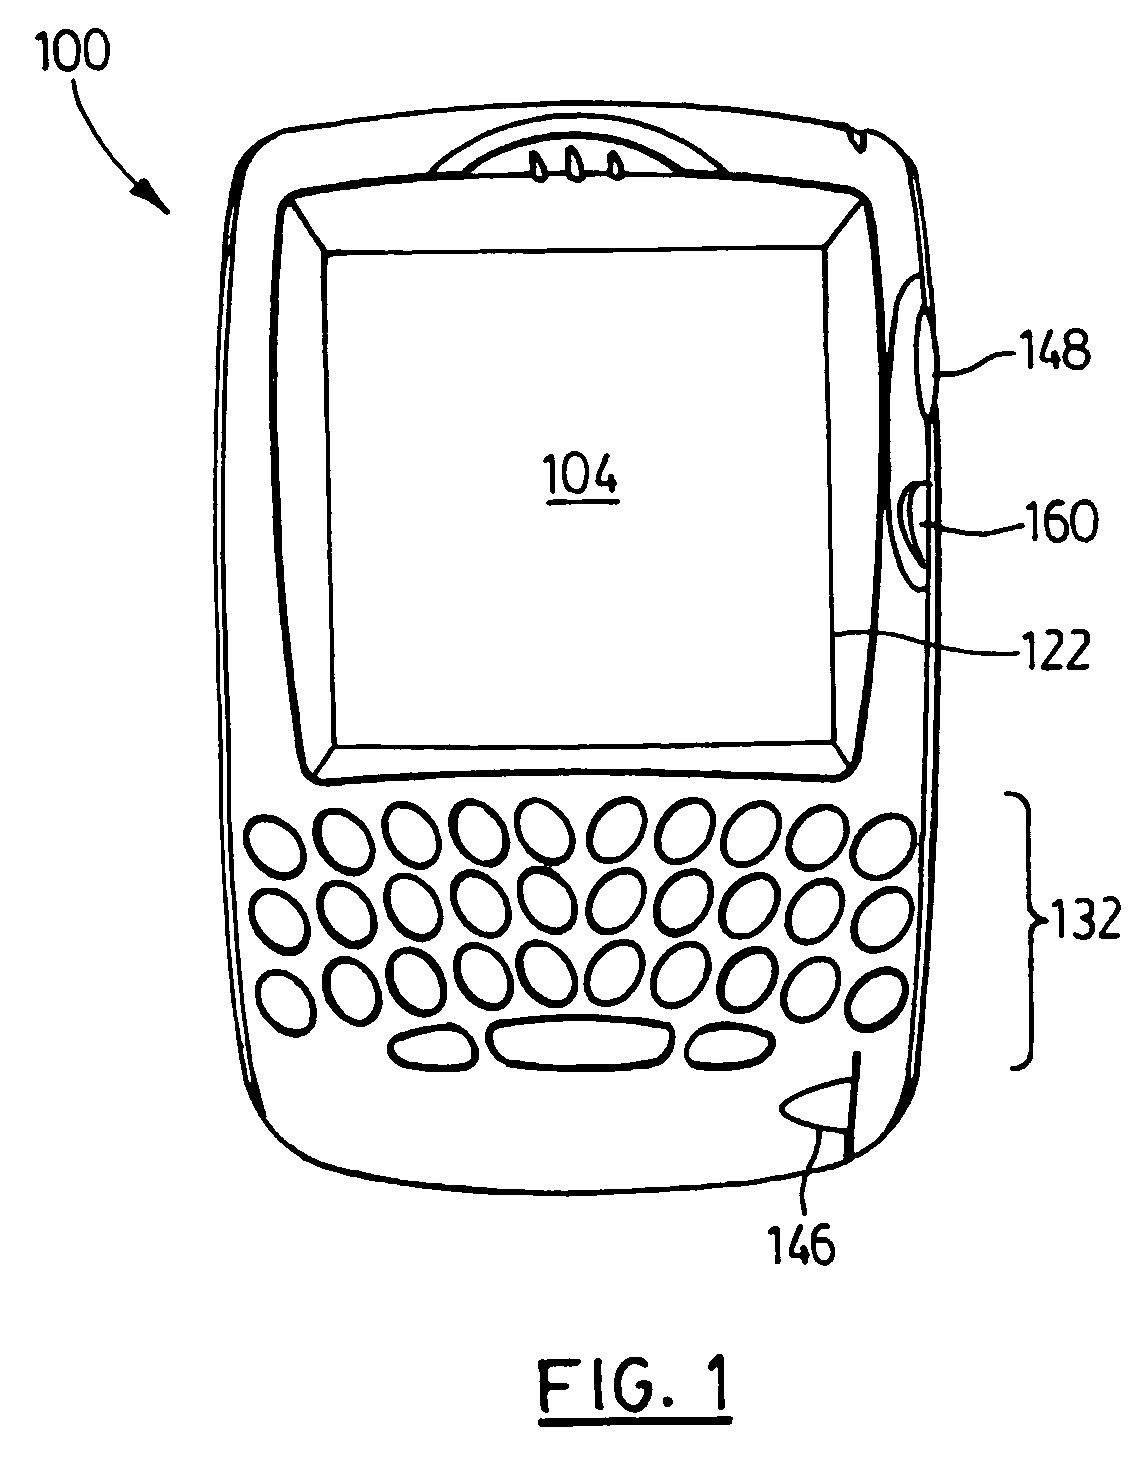 Auto-configuration of hardware on a portable computing device